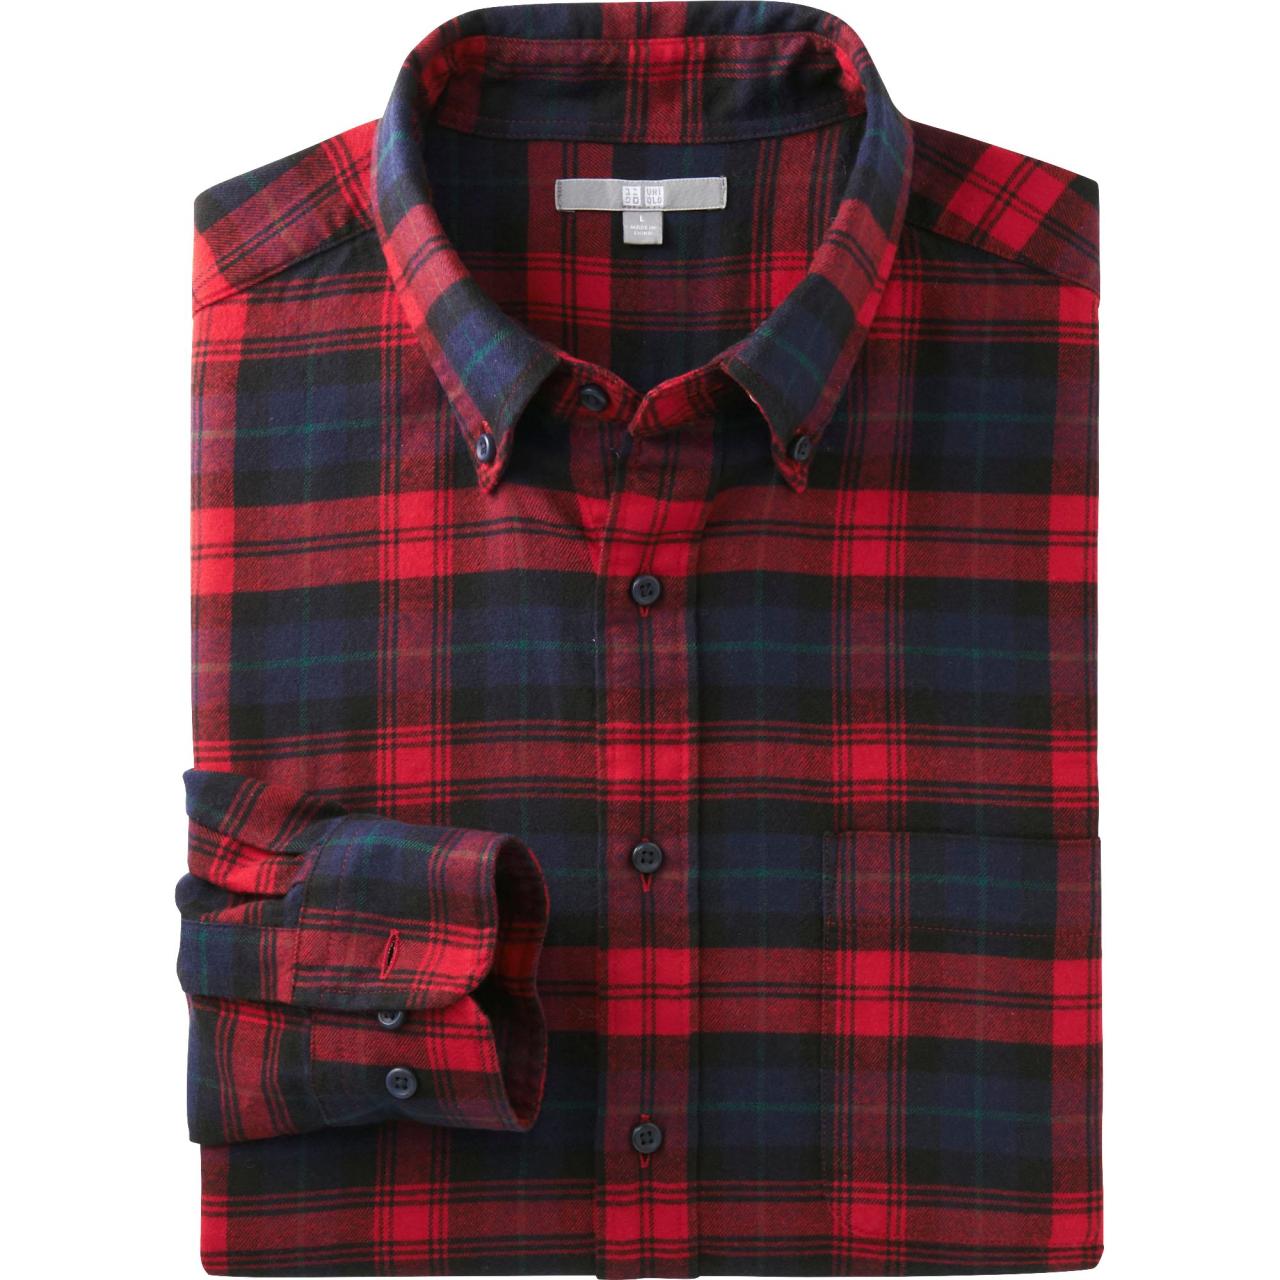 Uniqlo’s Flannels – Put This On